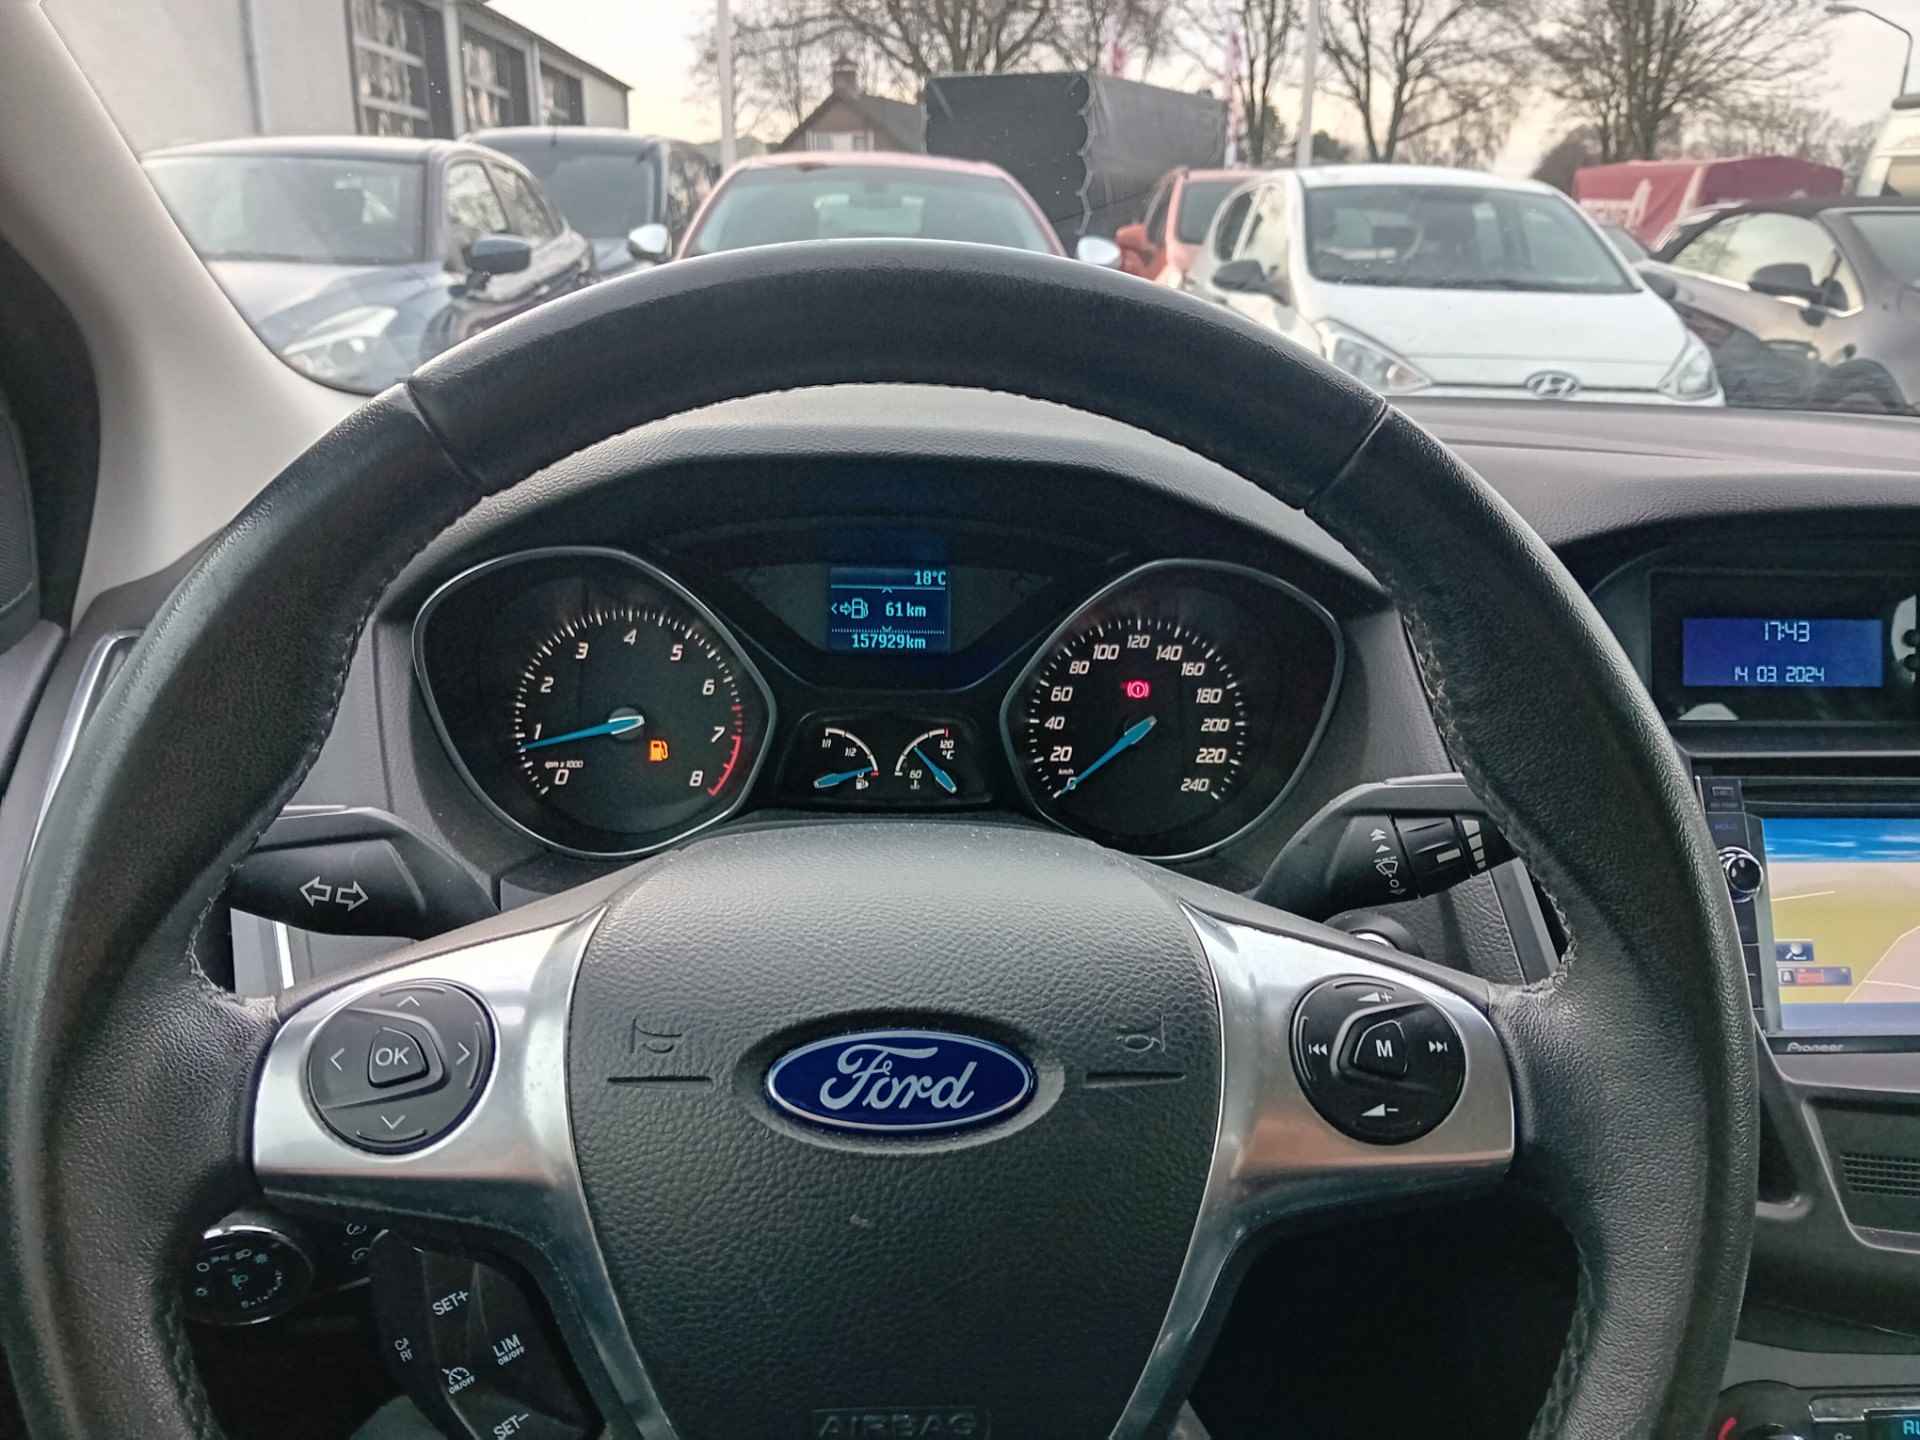 Ford Focus 1.6 TI-VCT First Edition - Navigatie - PDC - Trekhaak - 15/18